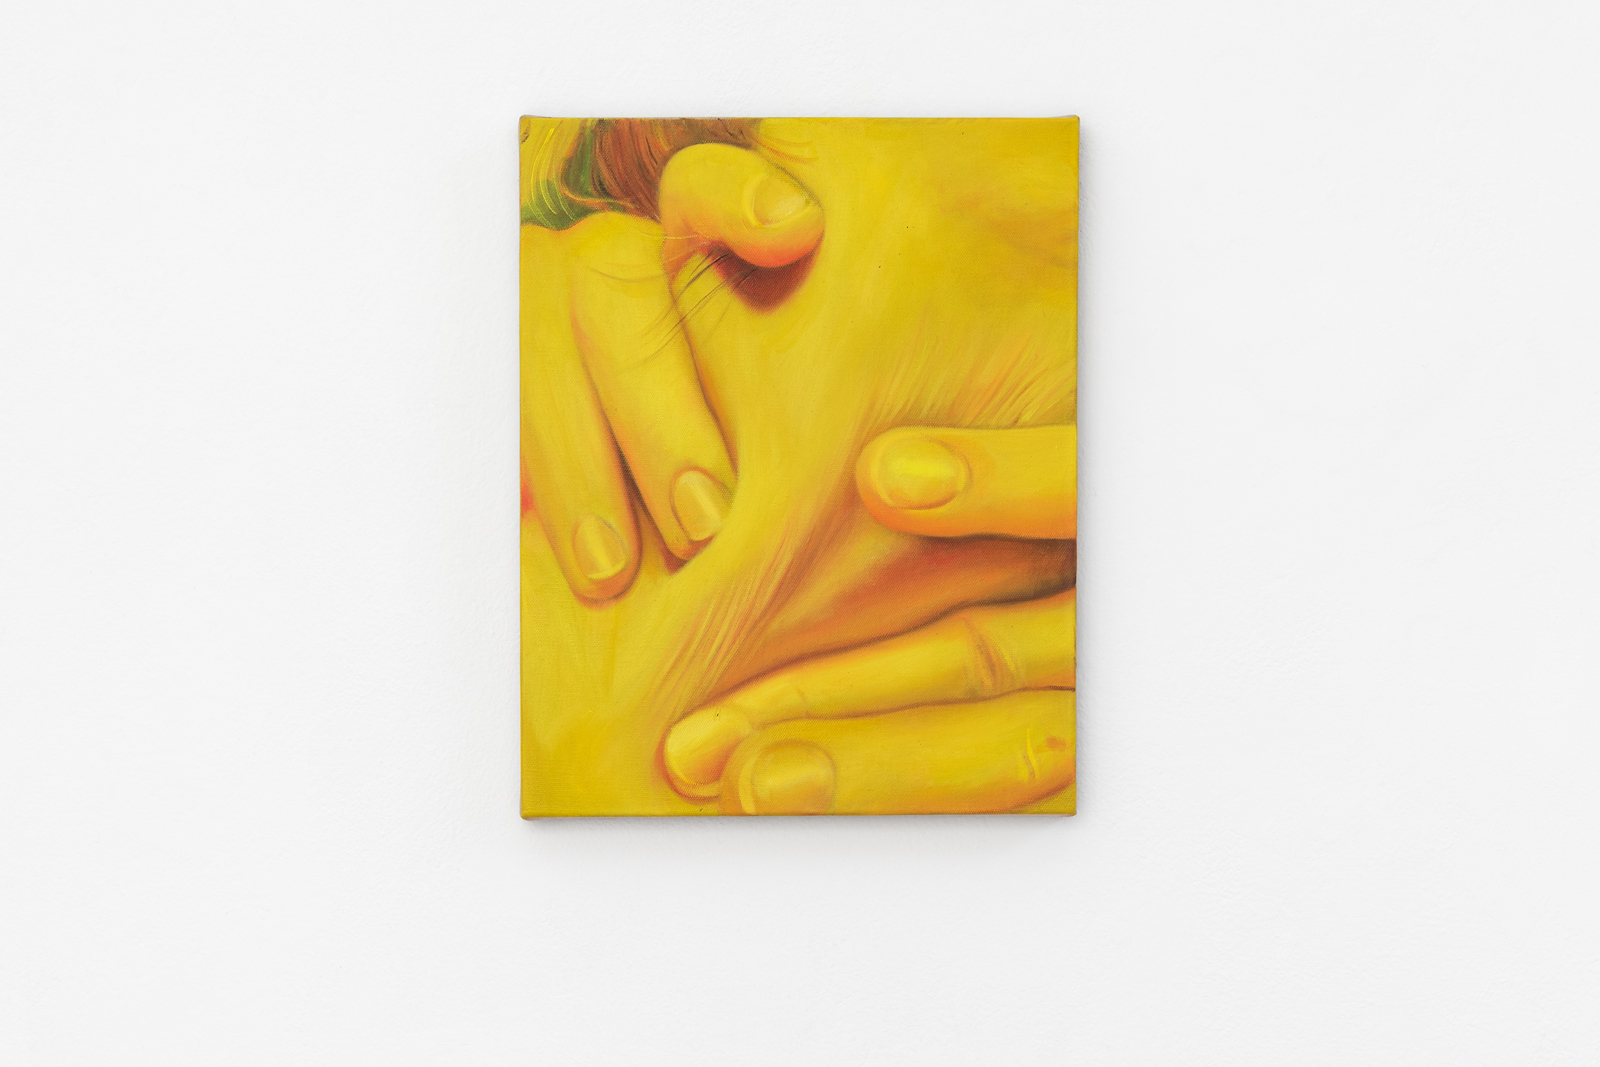 Tao Siqi, Hold Me Tight, 2022 Oil on canvas, 50 x 40 cm